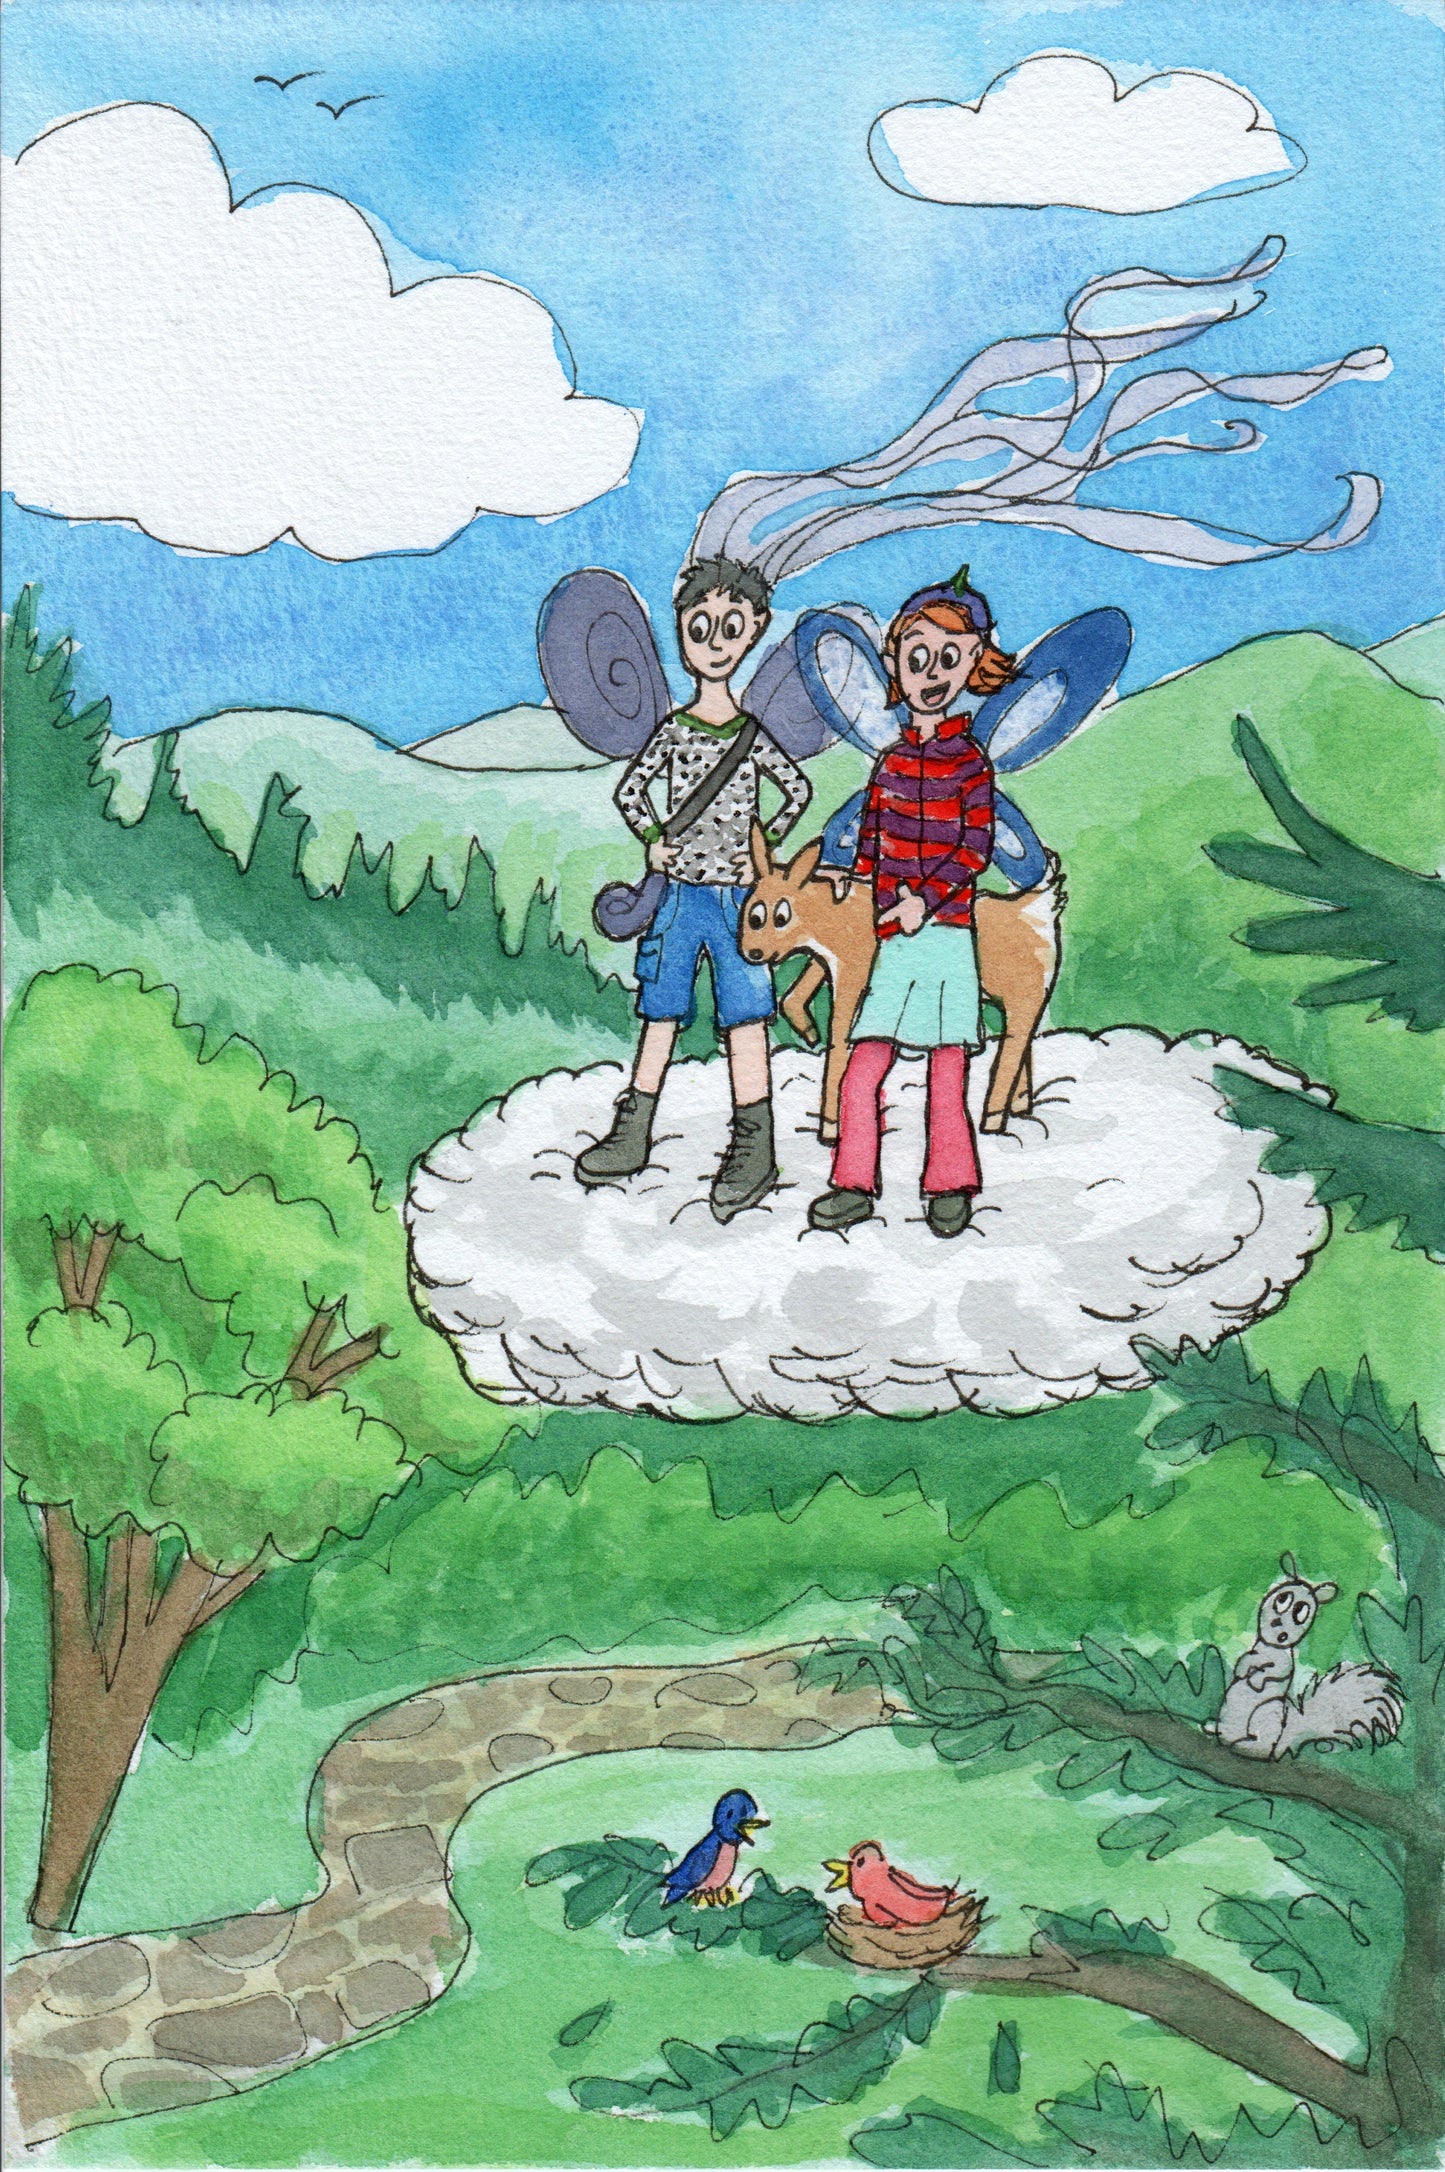 Mountain Fairies and the Deer in the Clouds - Fairy Children's Book Series -written and illustrated by Dorothy Tully